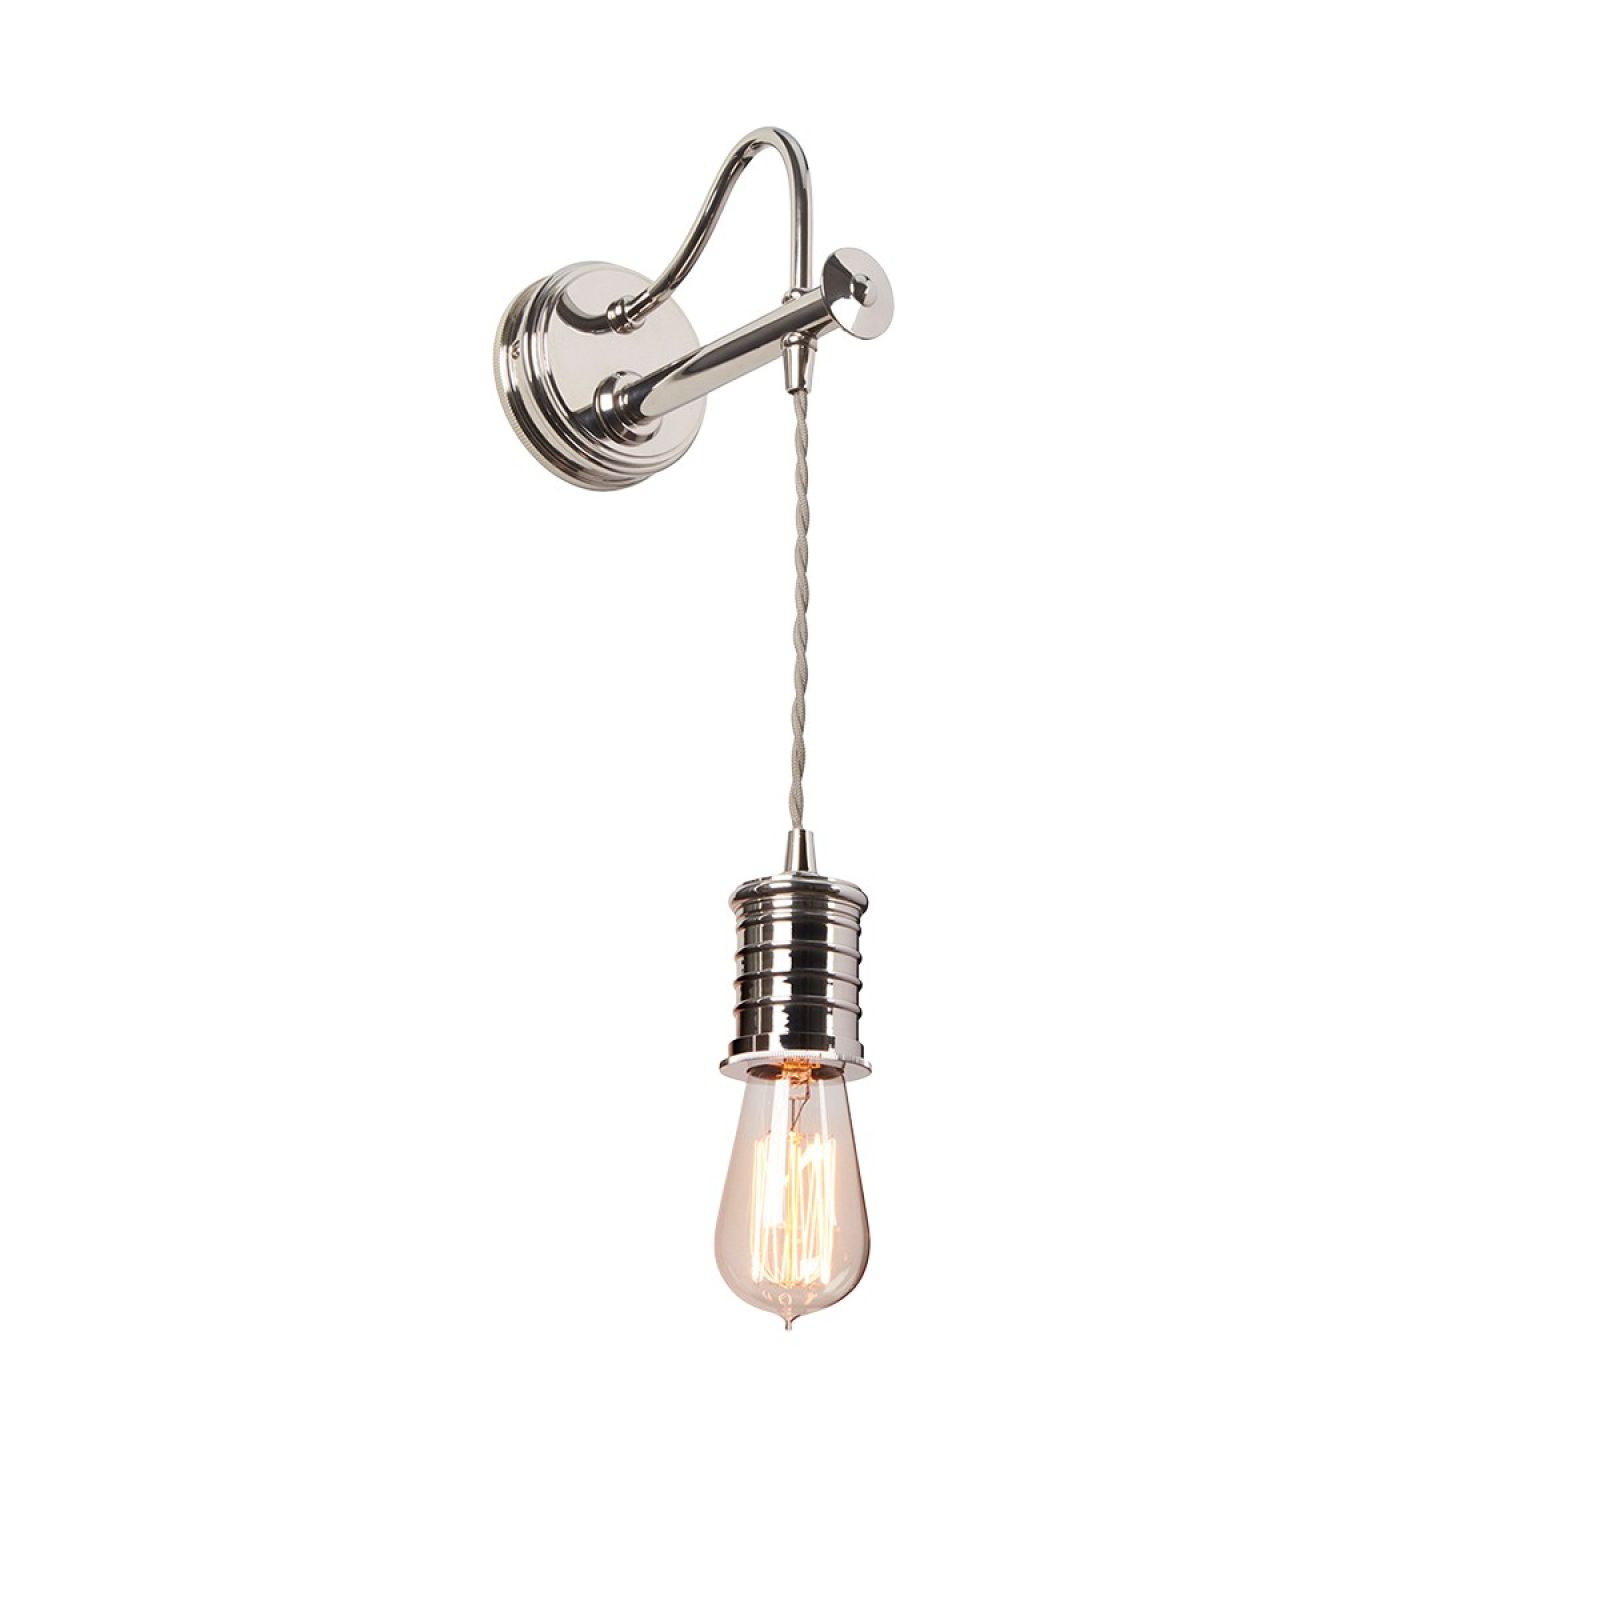 Douillet wall light in Polished Nickel